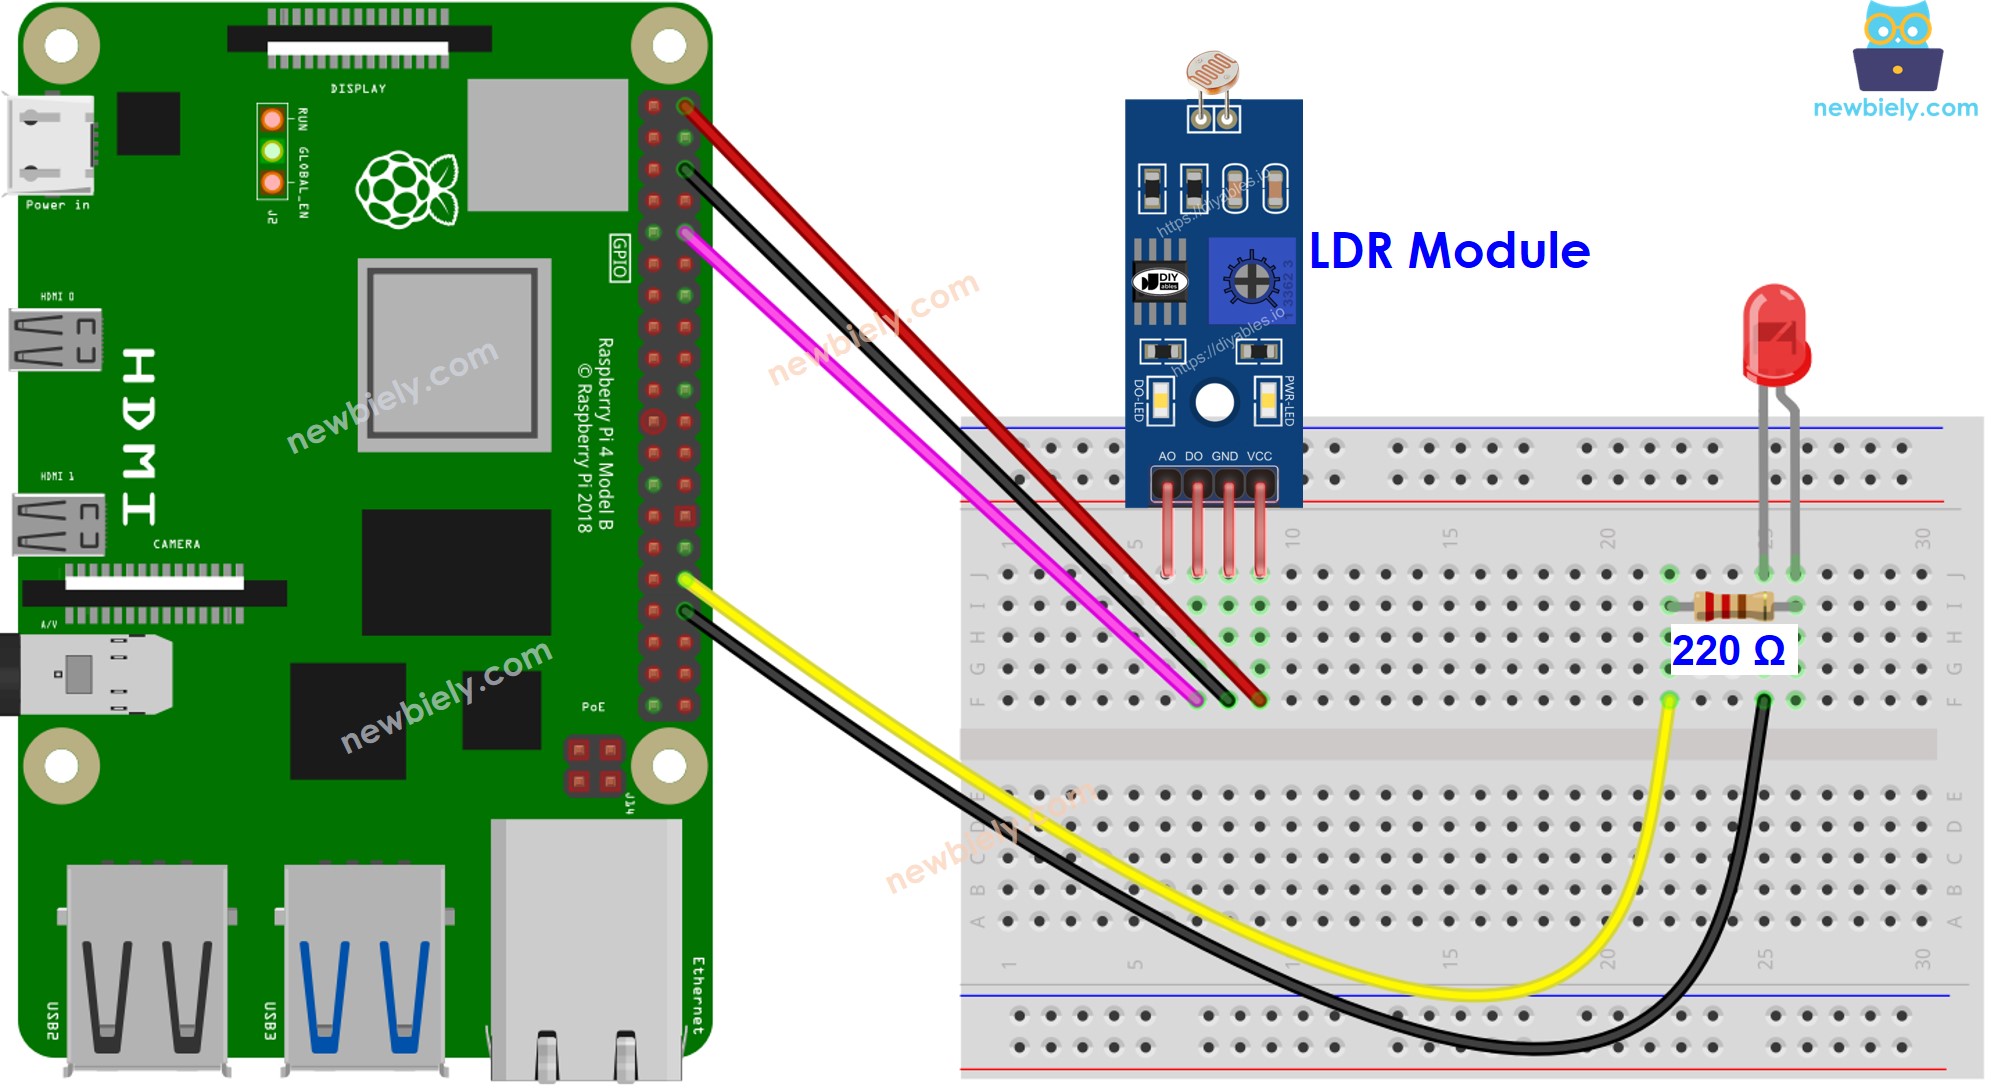 The wiring diagram between Raspberry Pi and Light Sensor LED